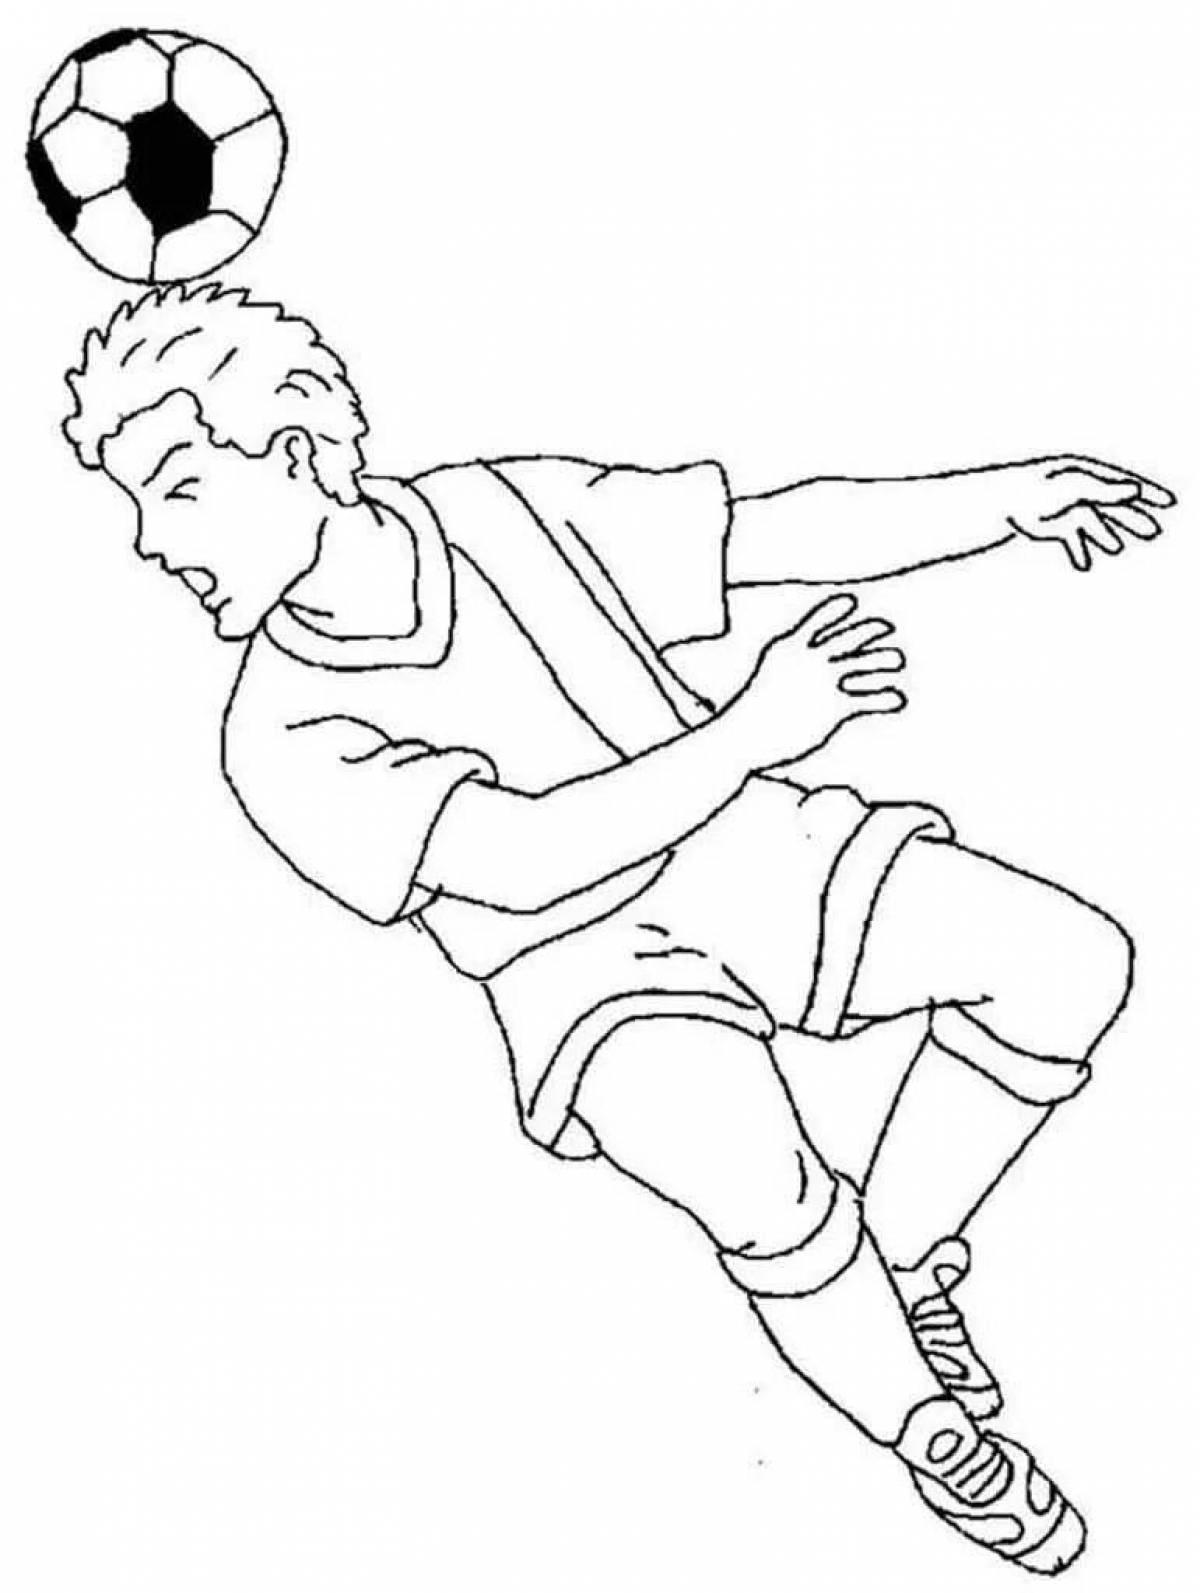 Coloring page adorable soccer player for kids